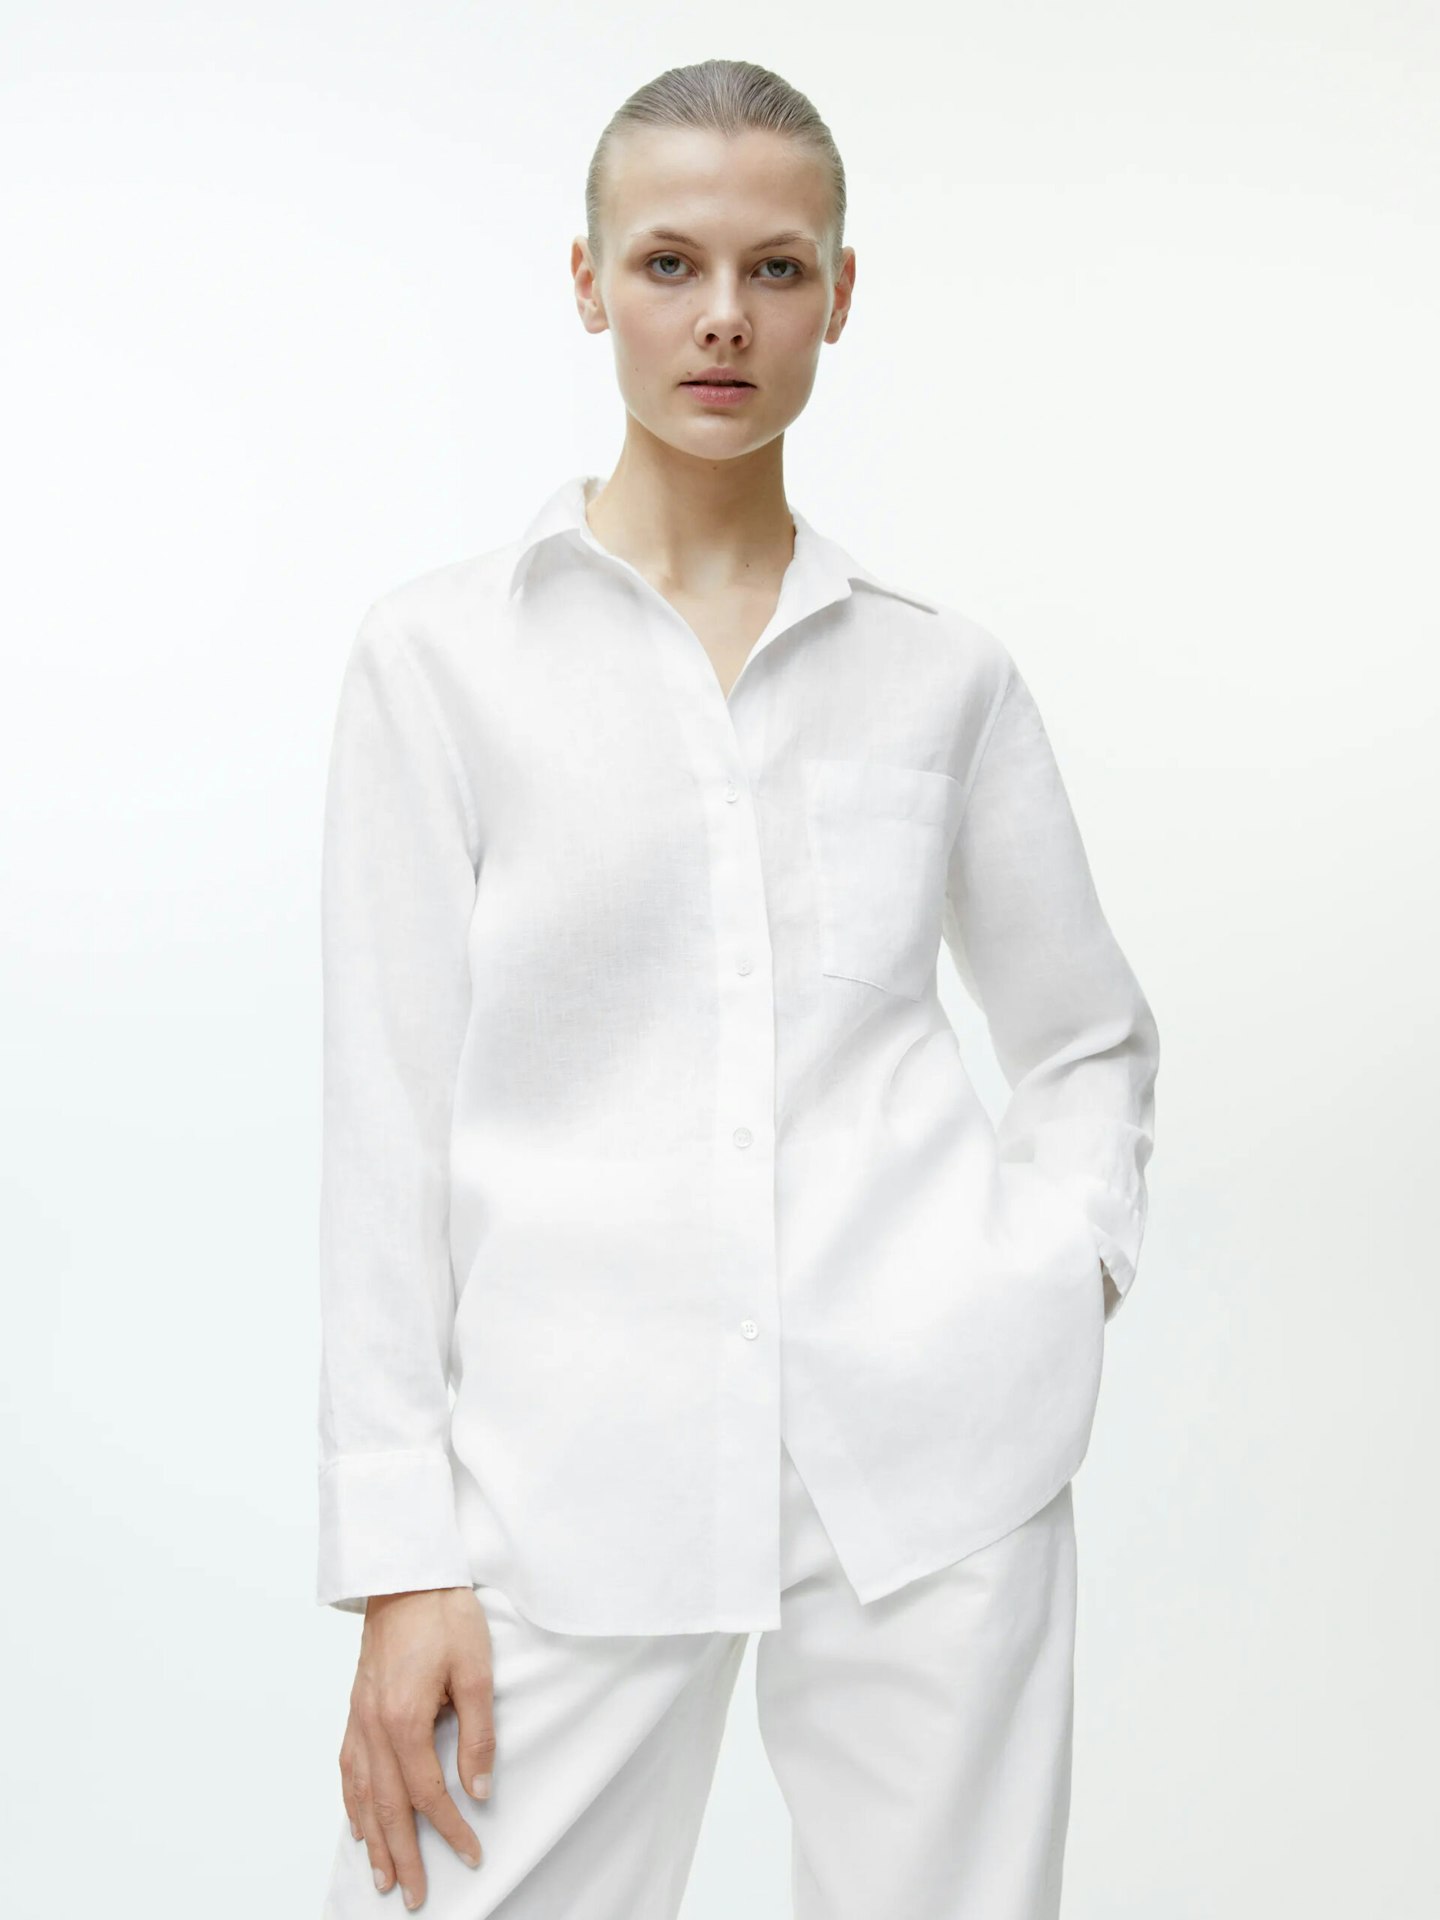 Best oversized shirts 2022: Our top picks for the high-street